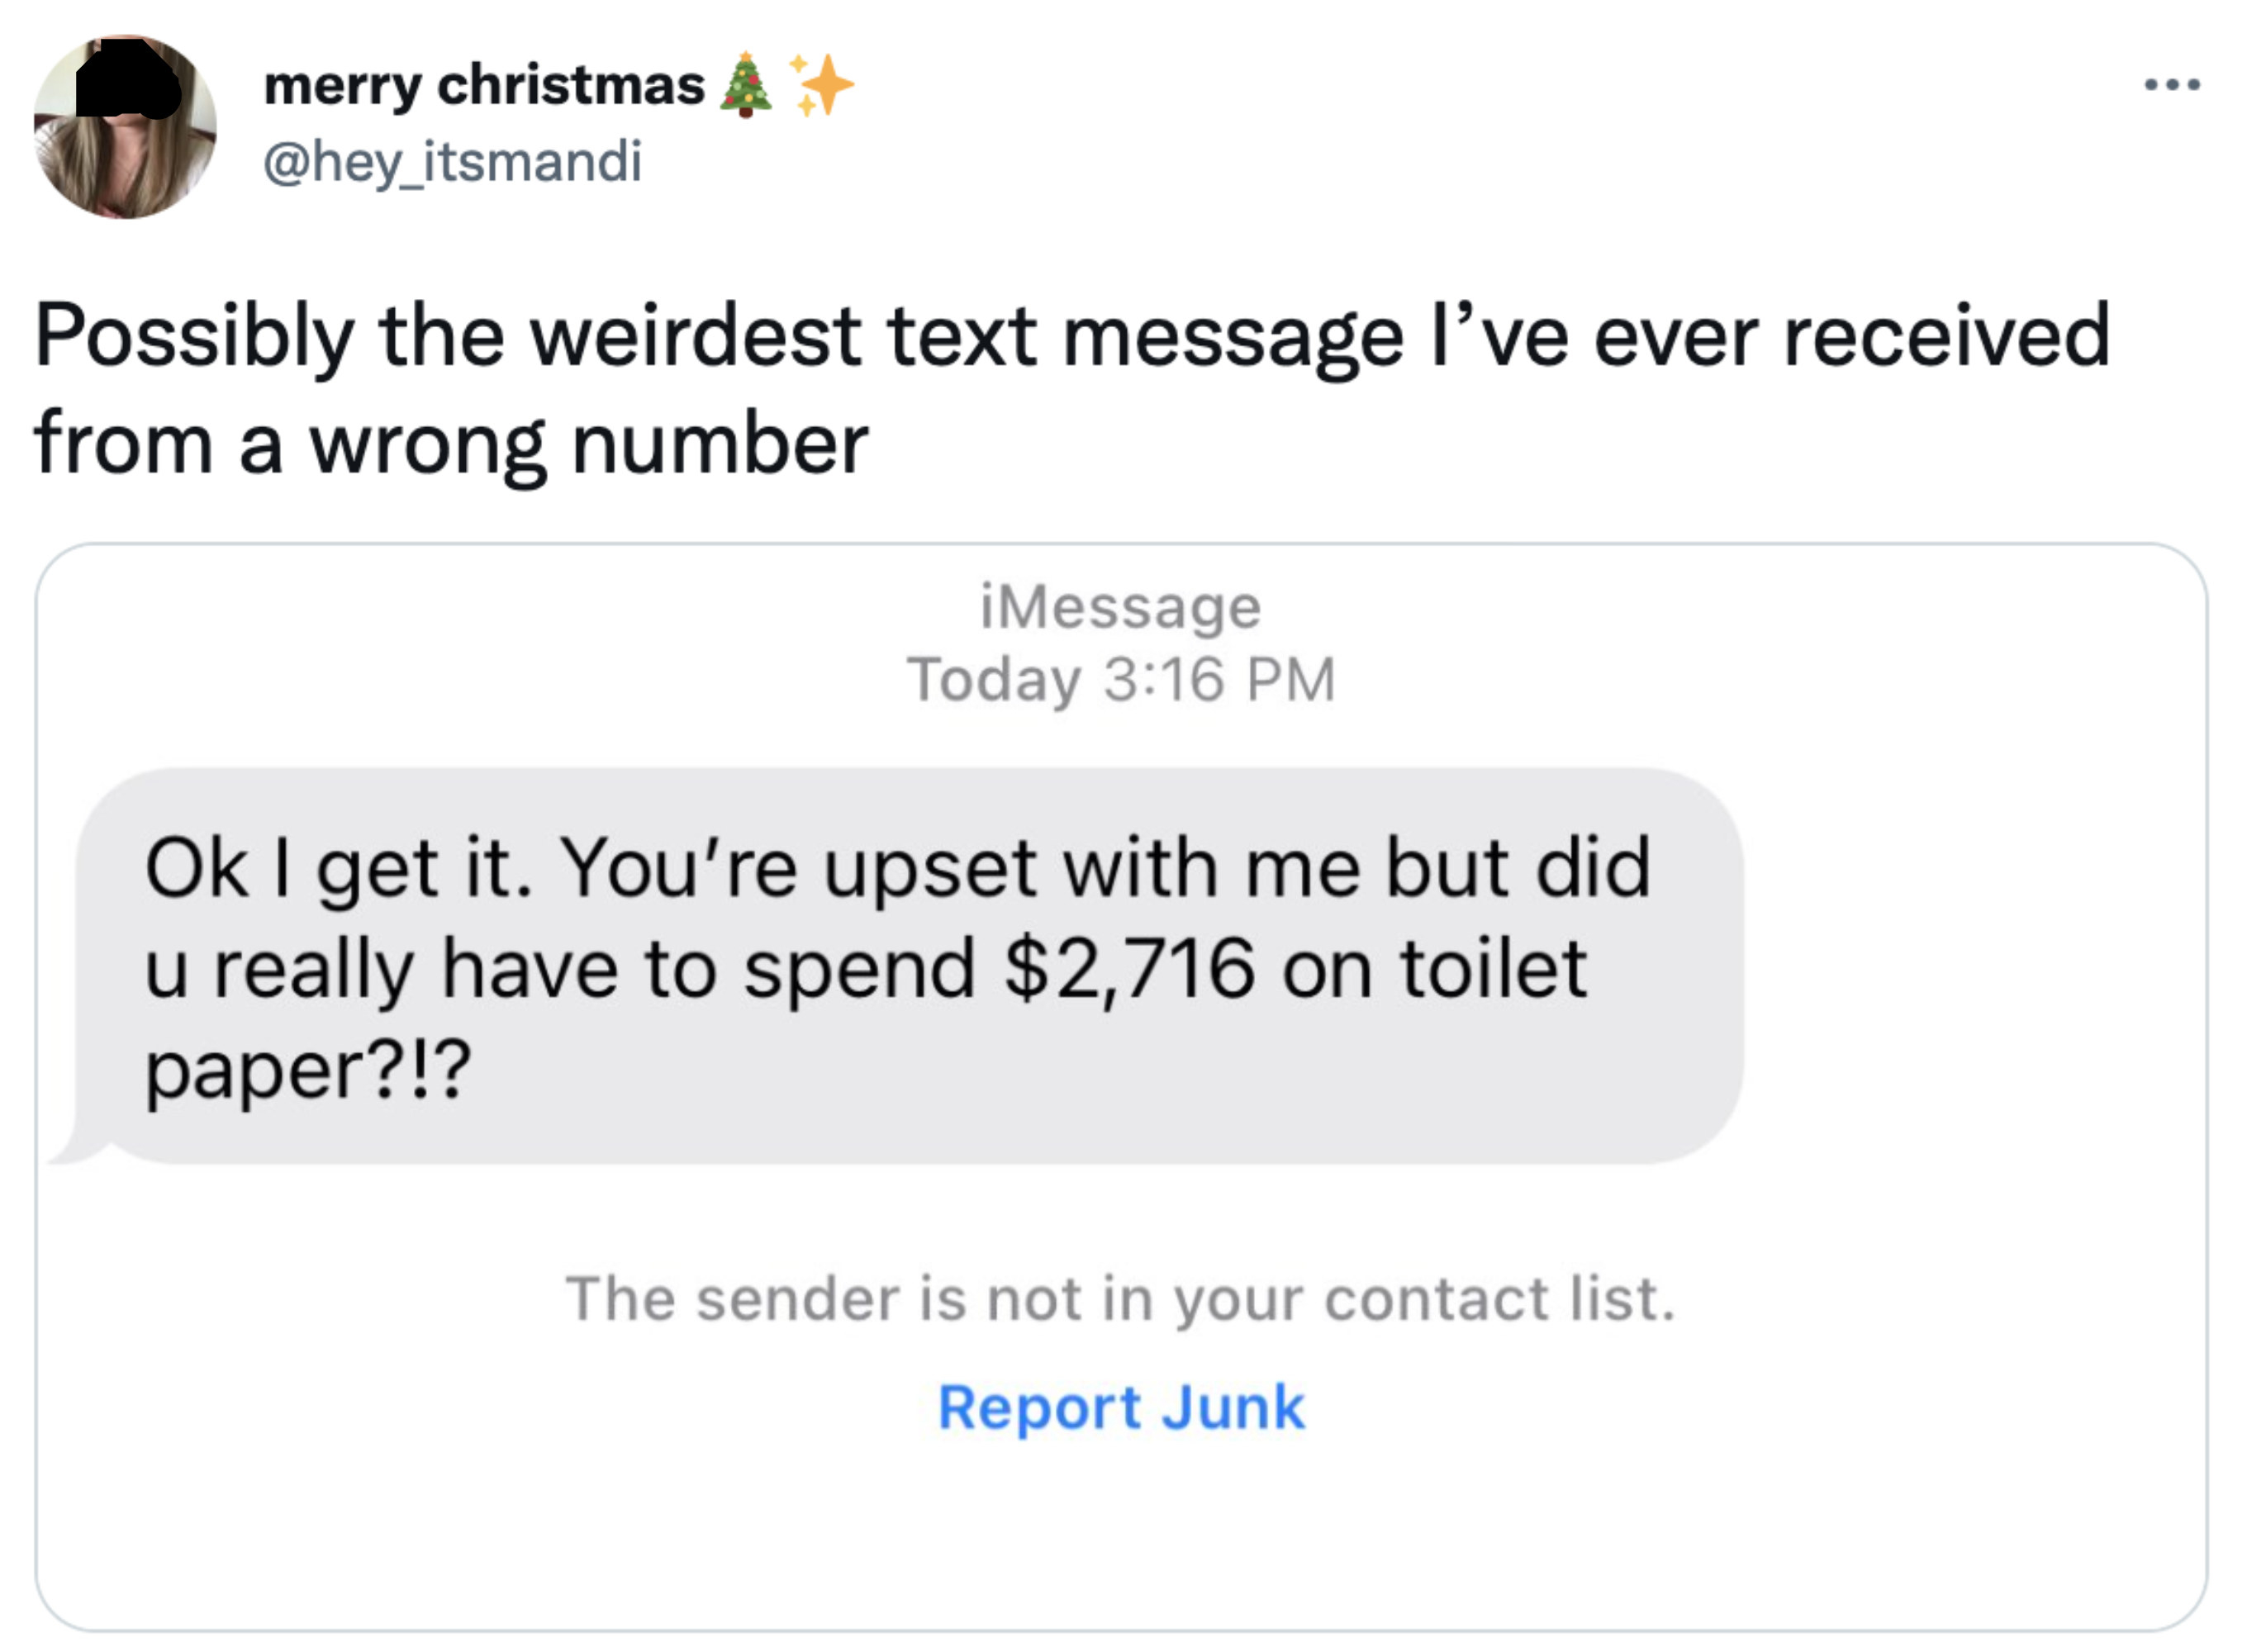 wrong number text of someone who spent a lot of money on toilet paaper